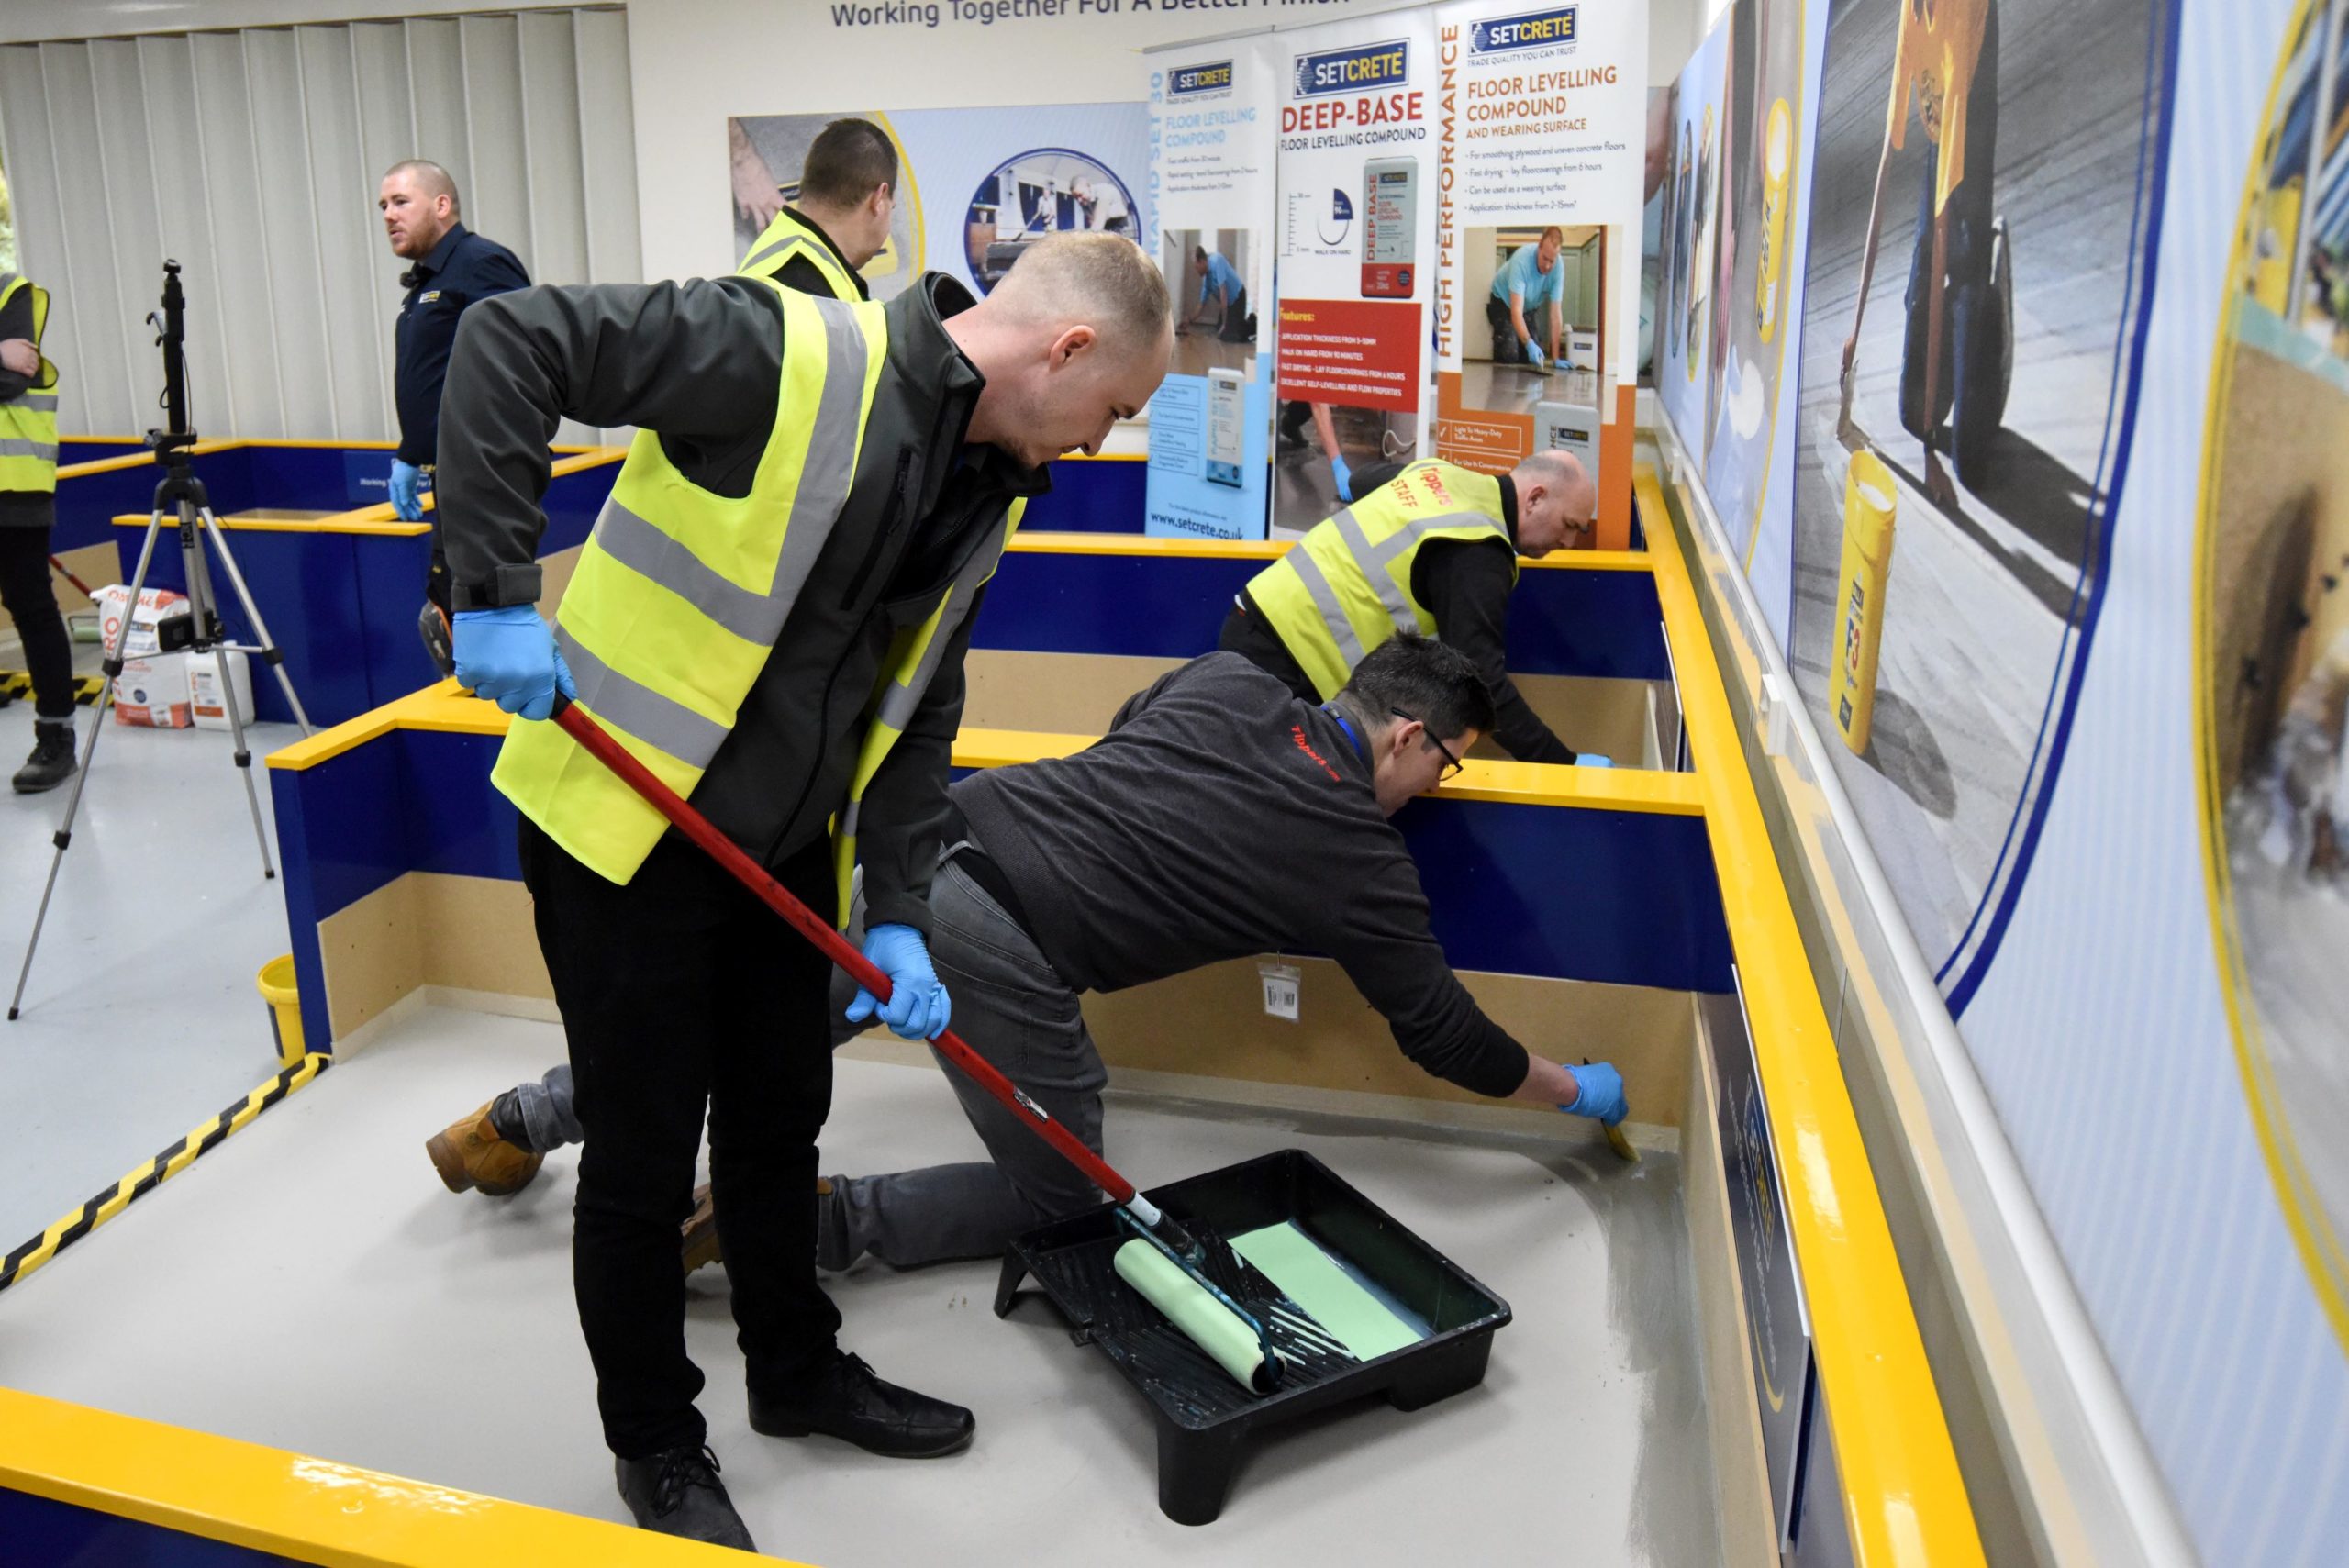 Tippers Builders Merchants has hailed the product training and in-branch support provided by Setcrete in helping the merchant achieve record levelling compound sales across its 12 branches located in the Midlands.